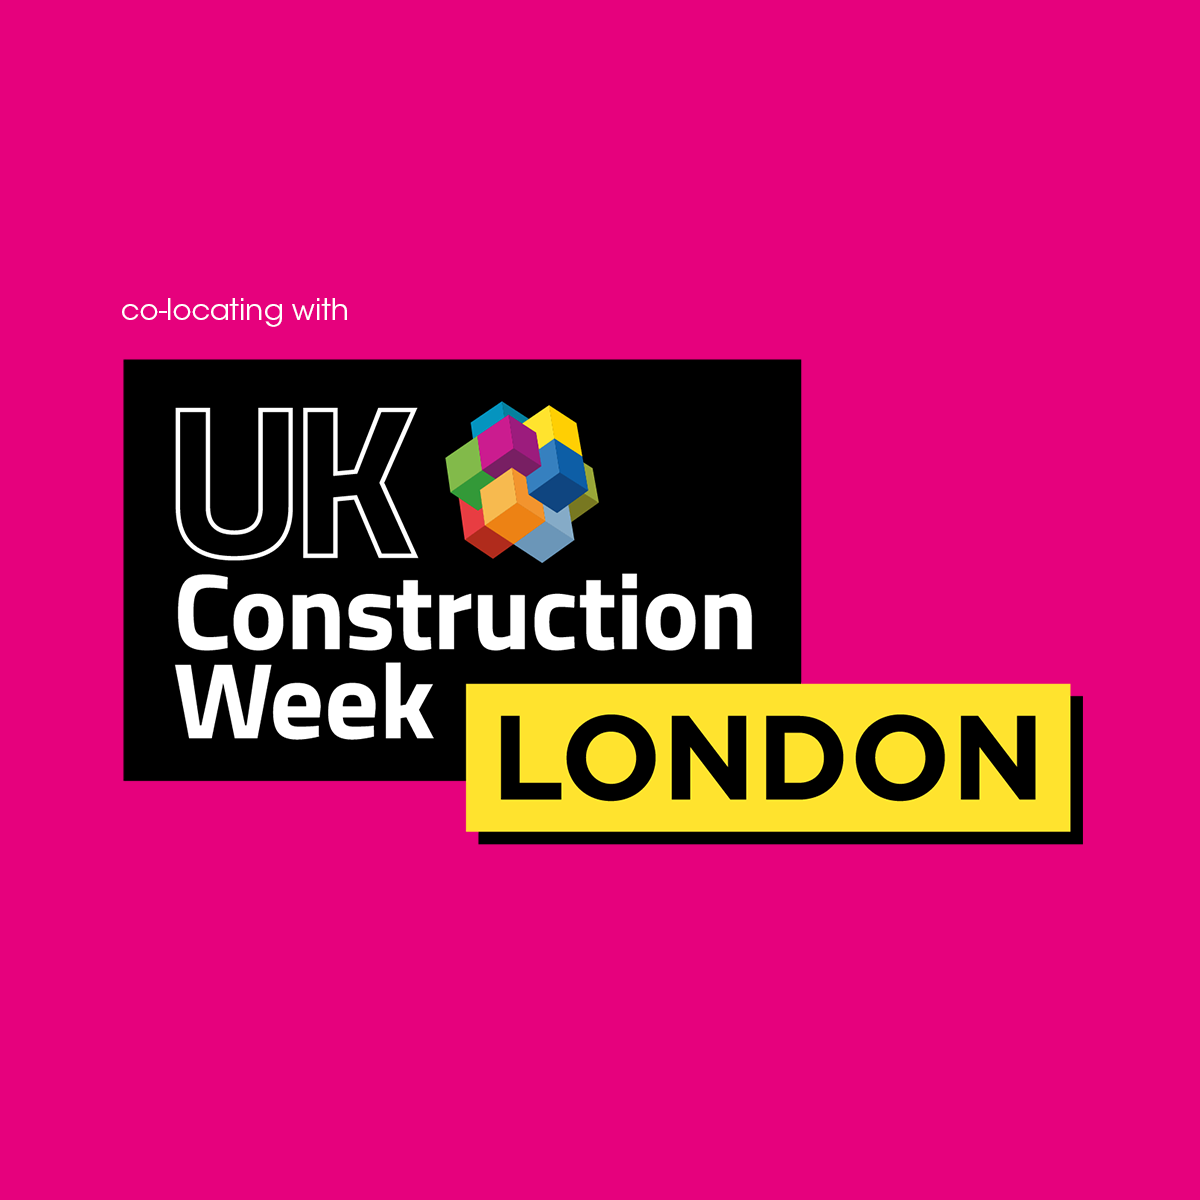 co-locating with UK Construction Week